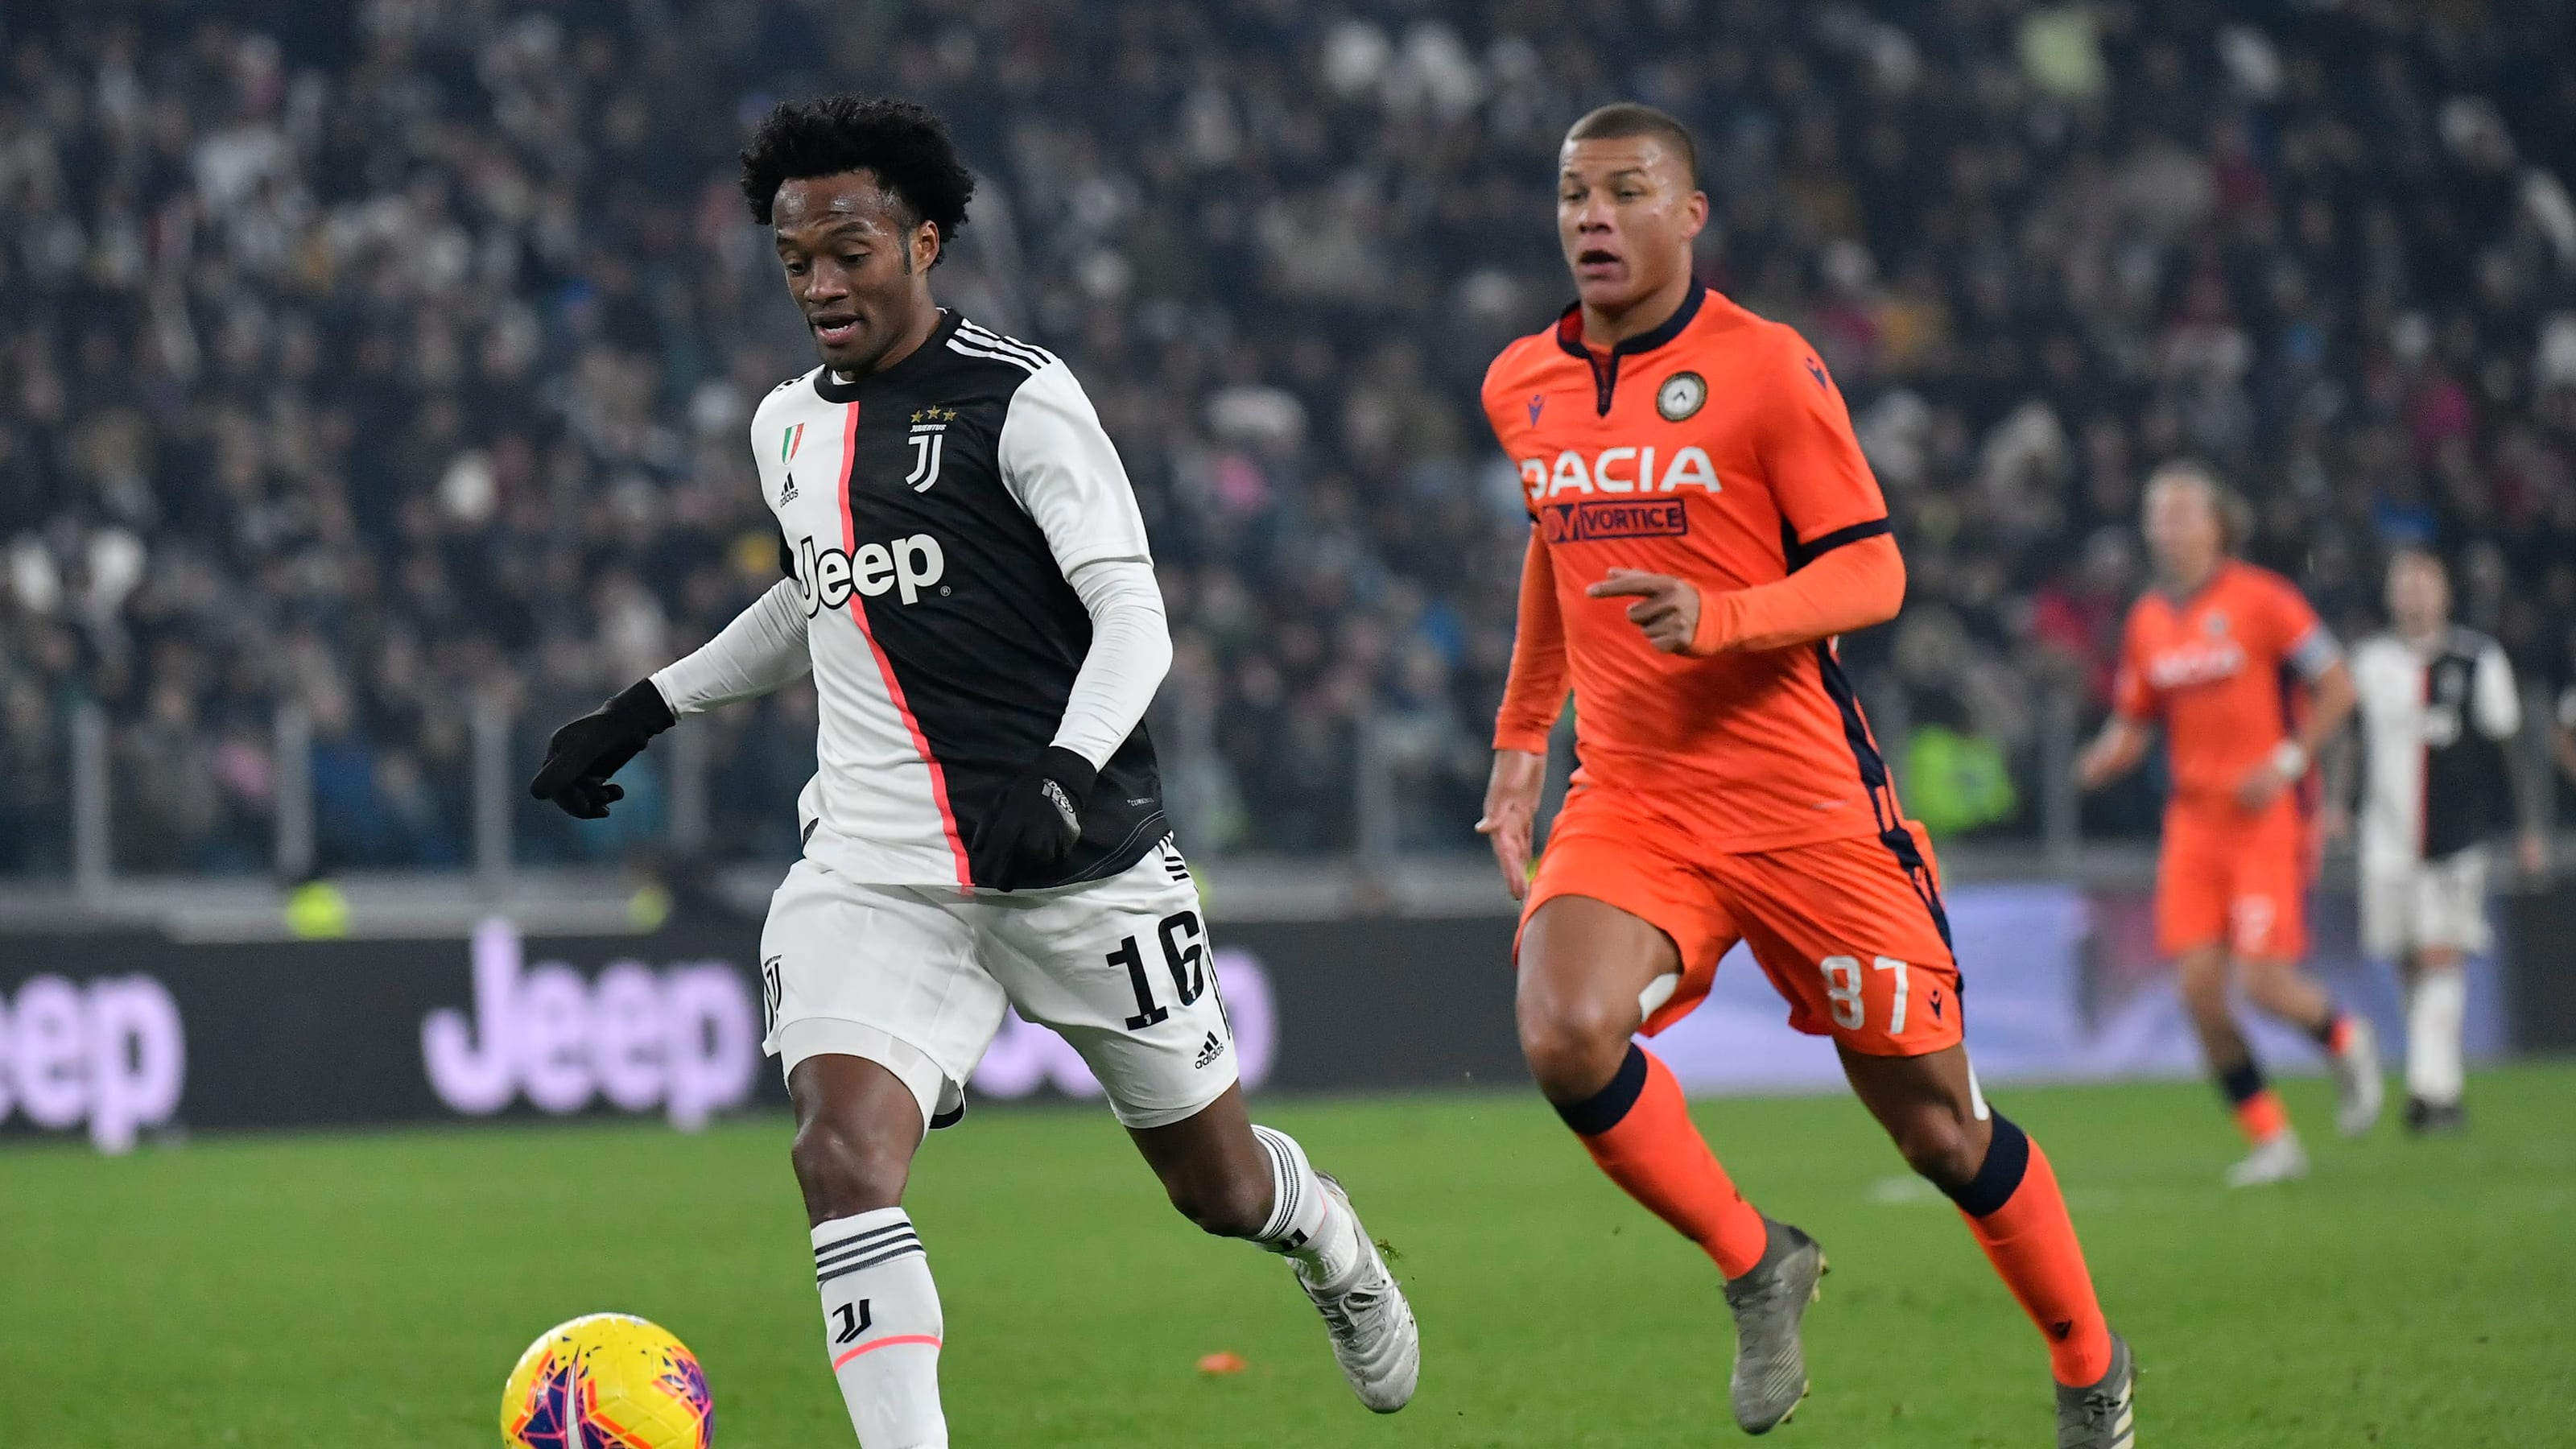 Udinese vs Juventus Serie A preview: All you need to know